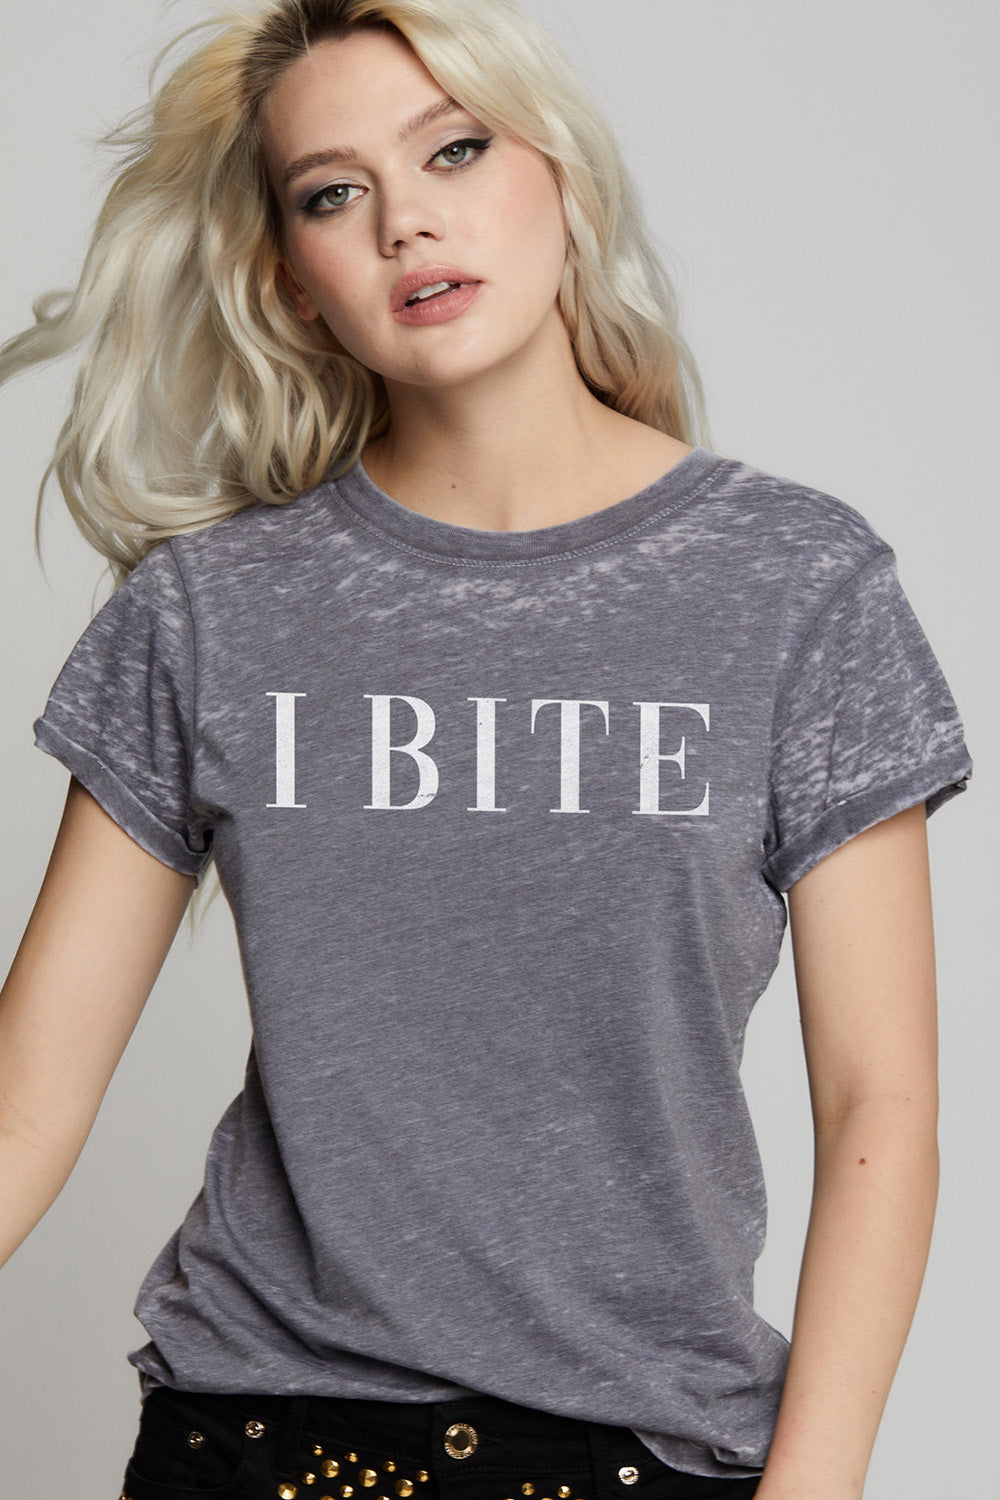 I Bite Grey Fitted Tee